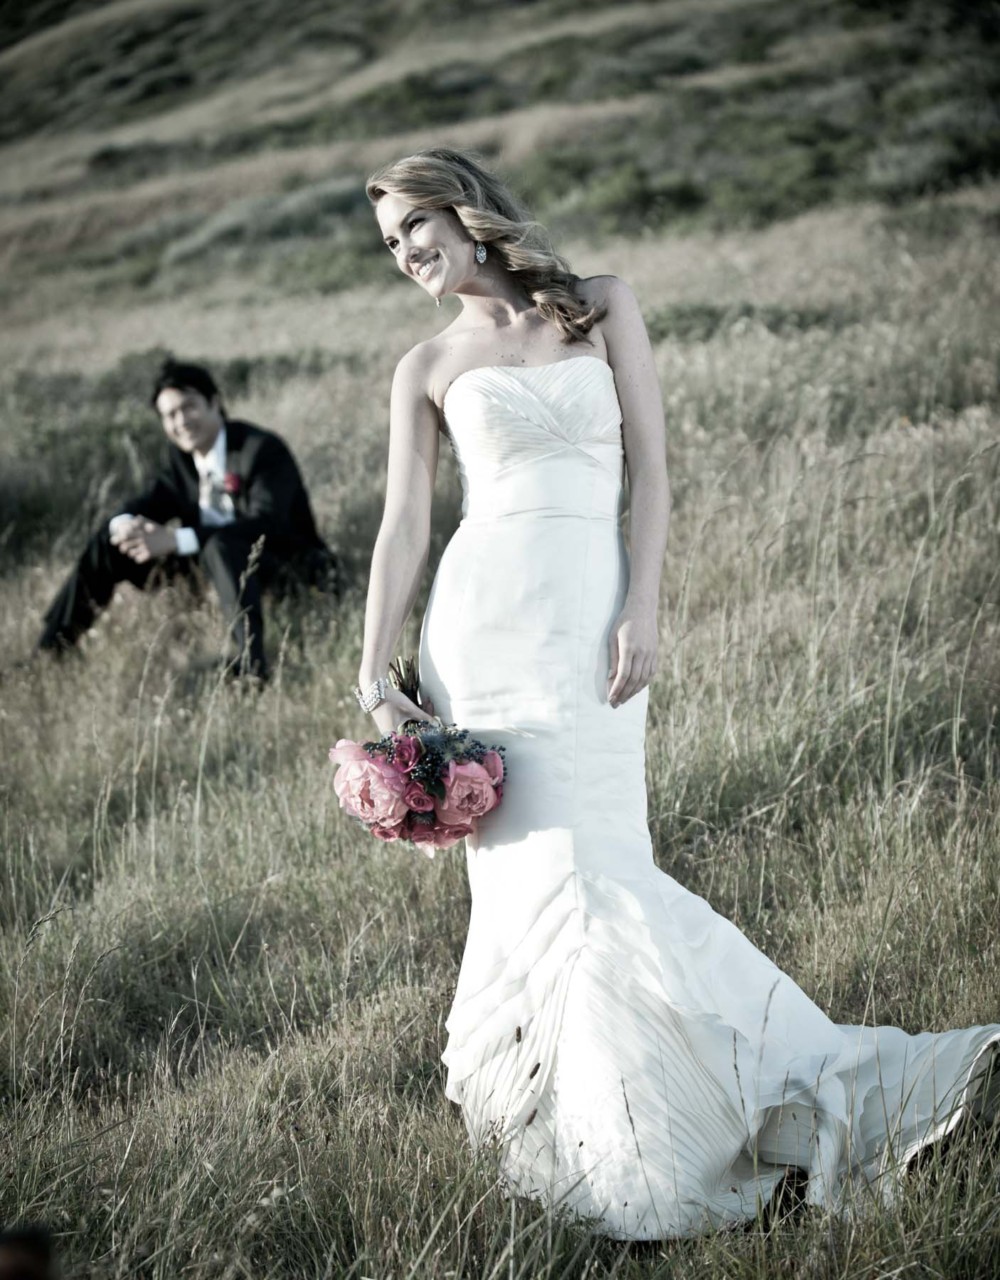 Looking for a summer wedding photographer in Chugiak?